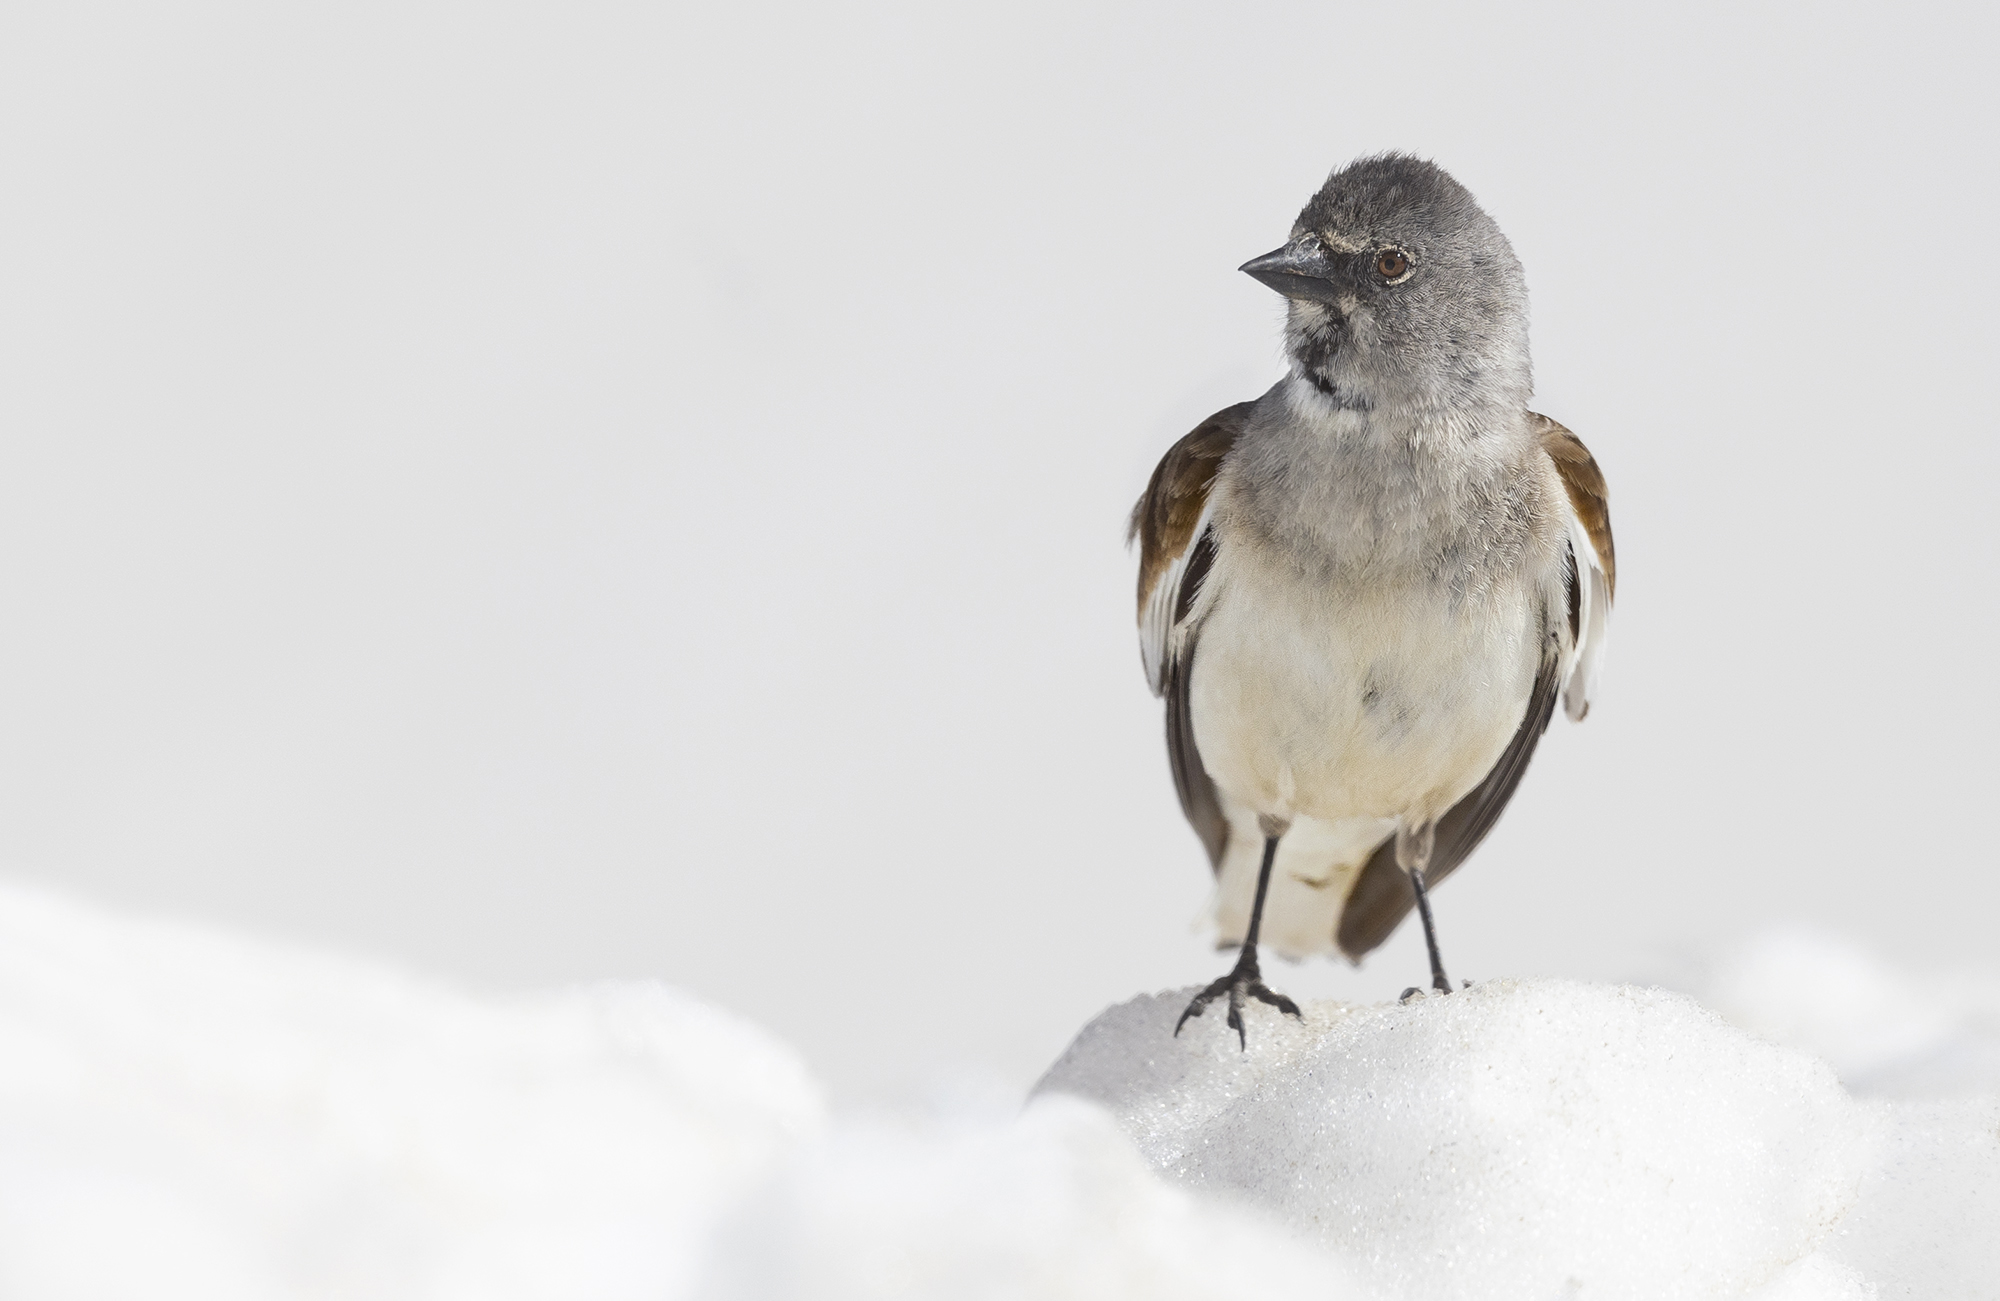 In the middle of the snow, in summer dress: alpine finch...